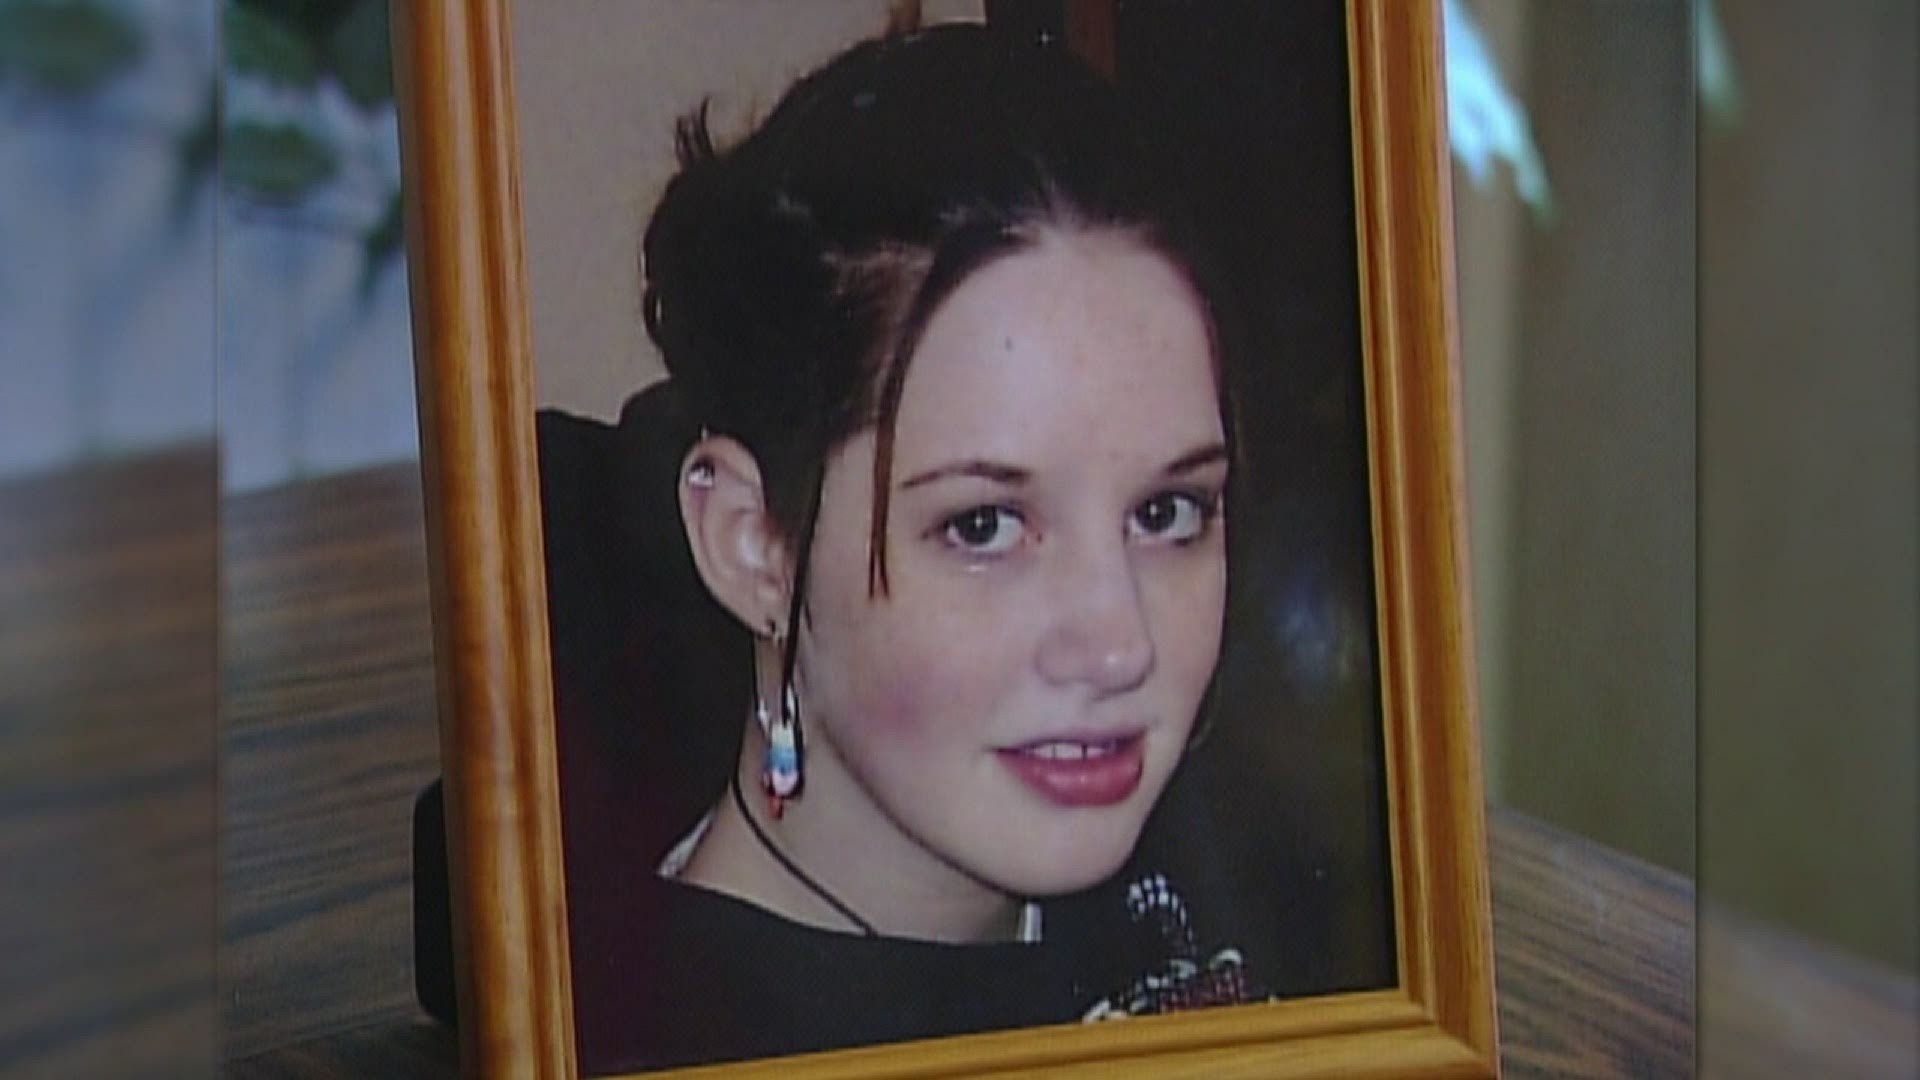 Cory Gregory, convicted murderer in Adrianne Reynolds Case to undergo physic evaluation